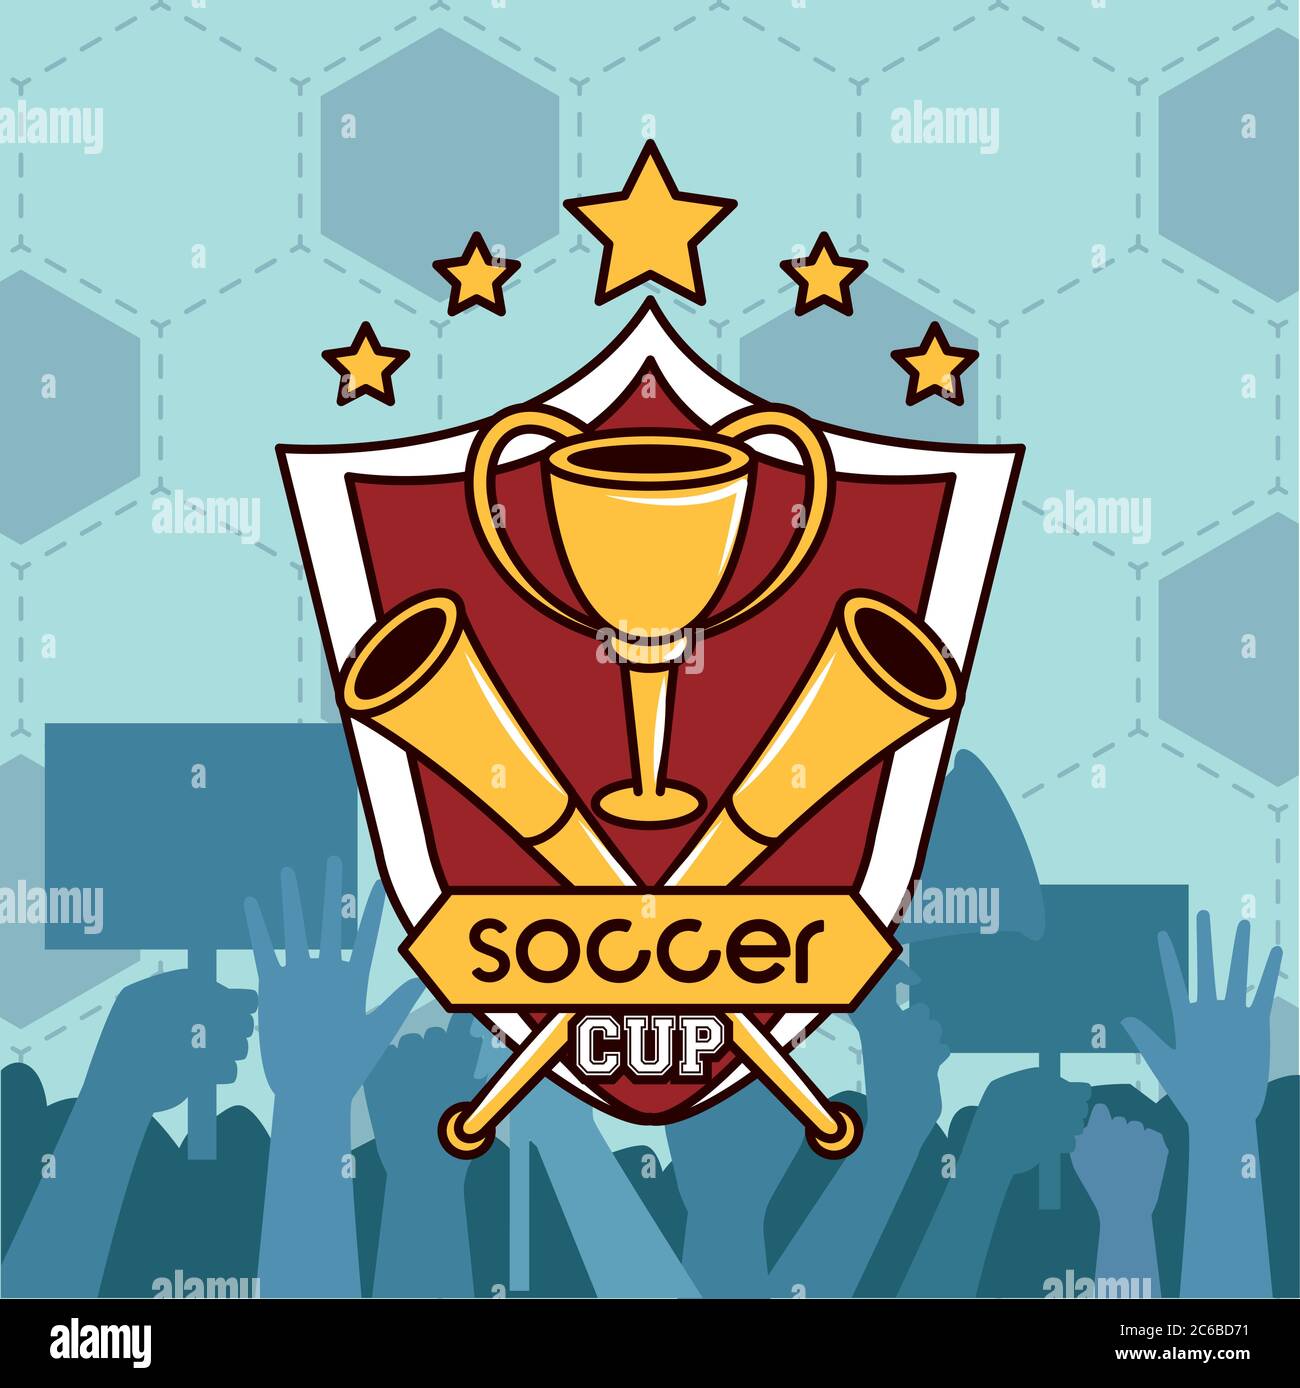 football soccer sport poster with trophy cup award vector illustration design Stock Vector